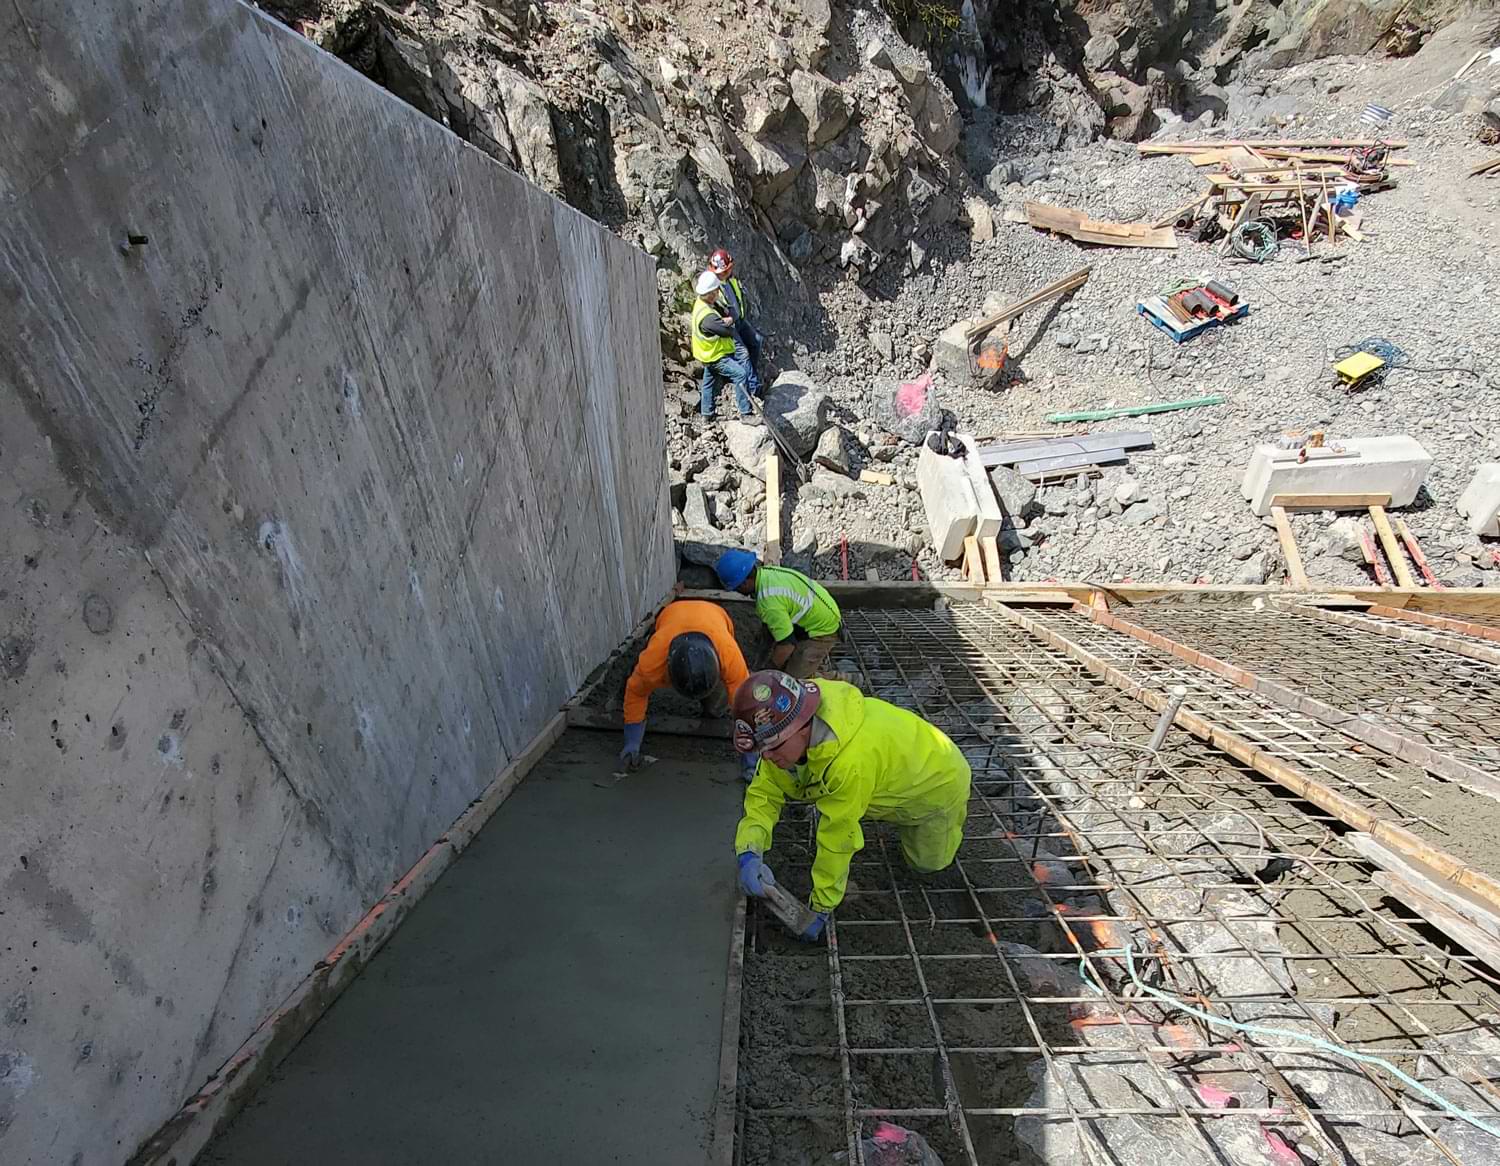 Orion crew members work on placing and finishing concrete on top of the 20-foot riprap spillway at the diversion site